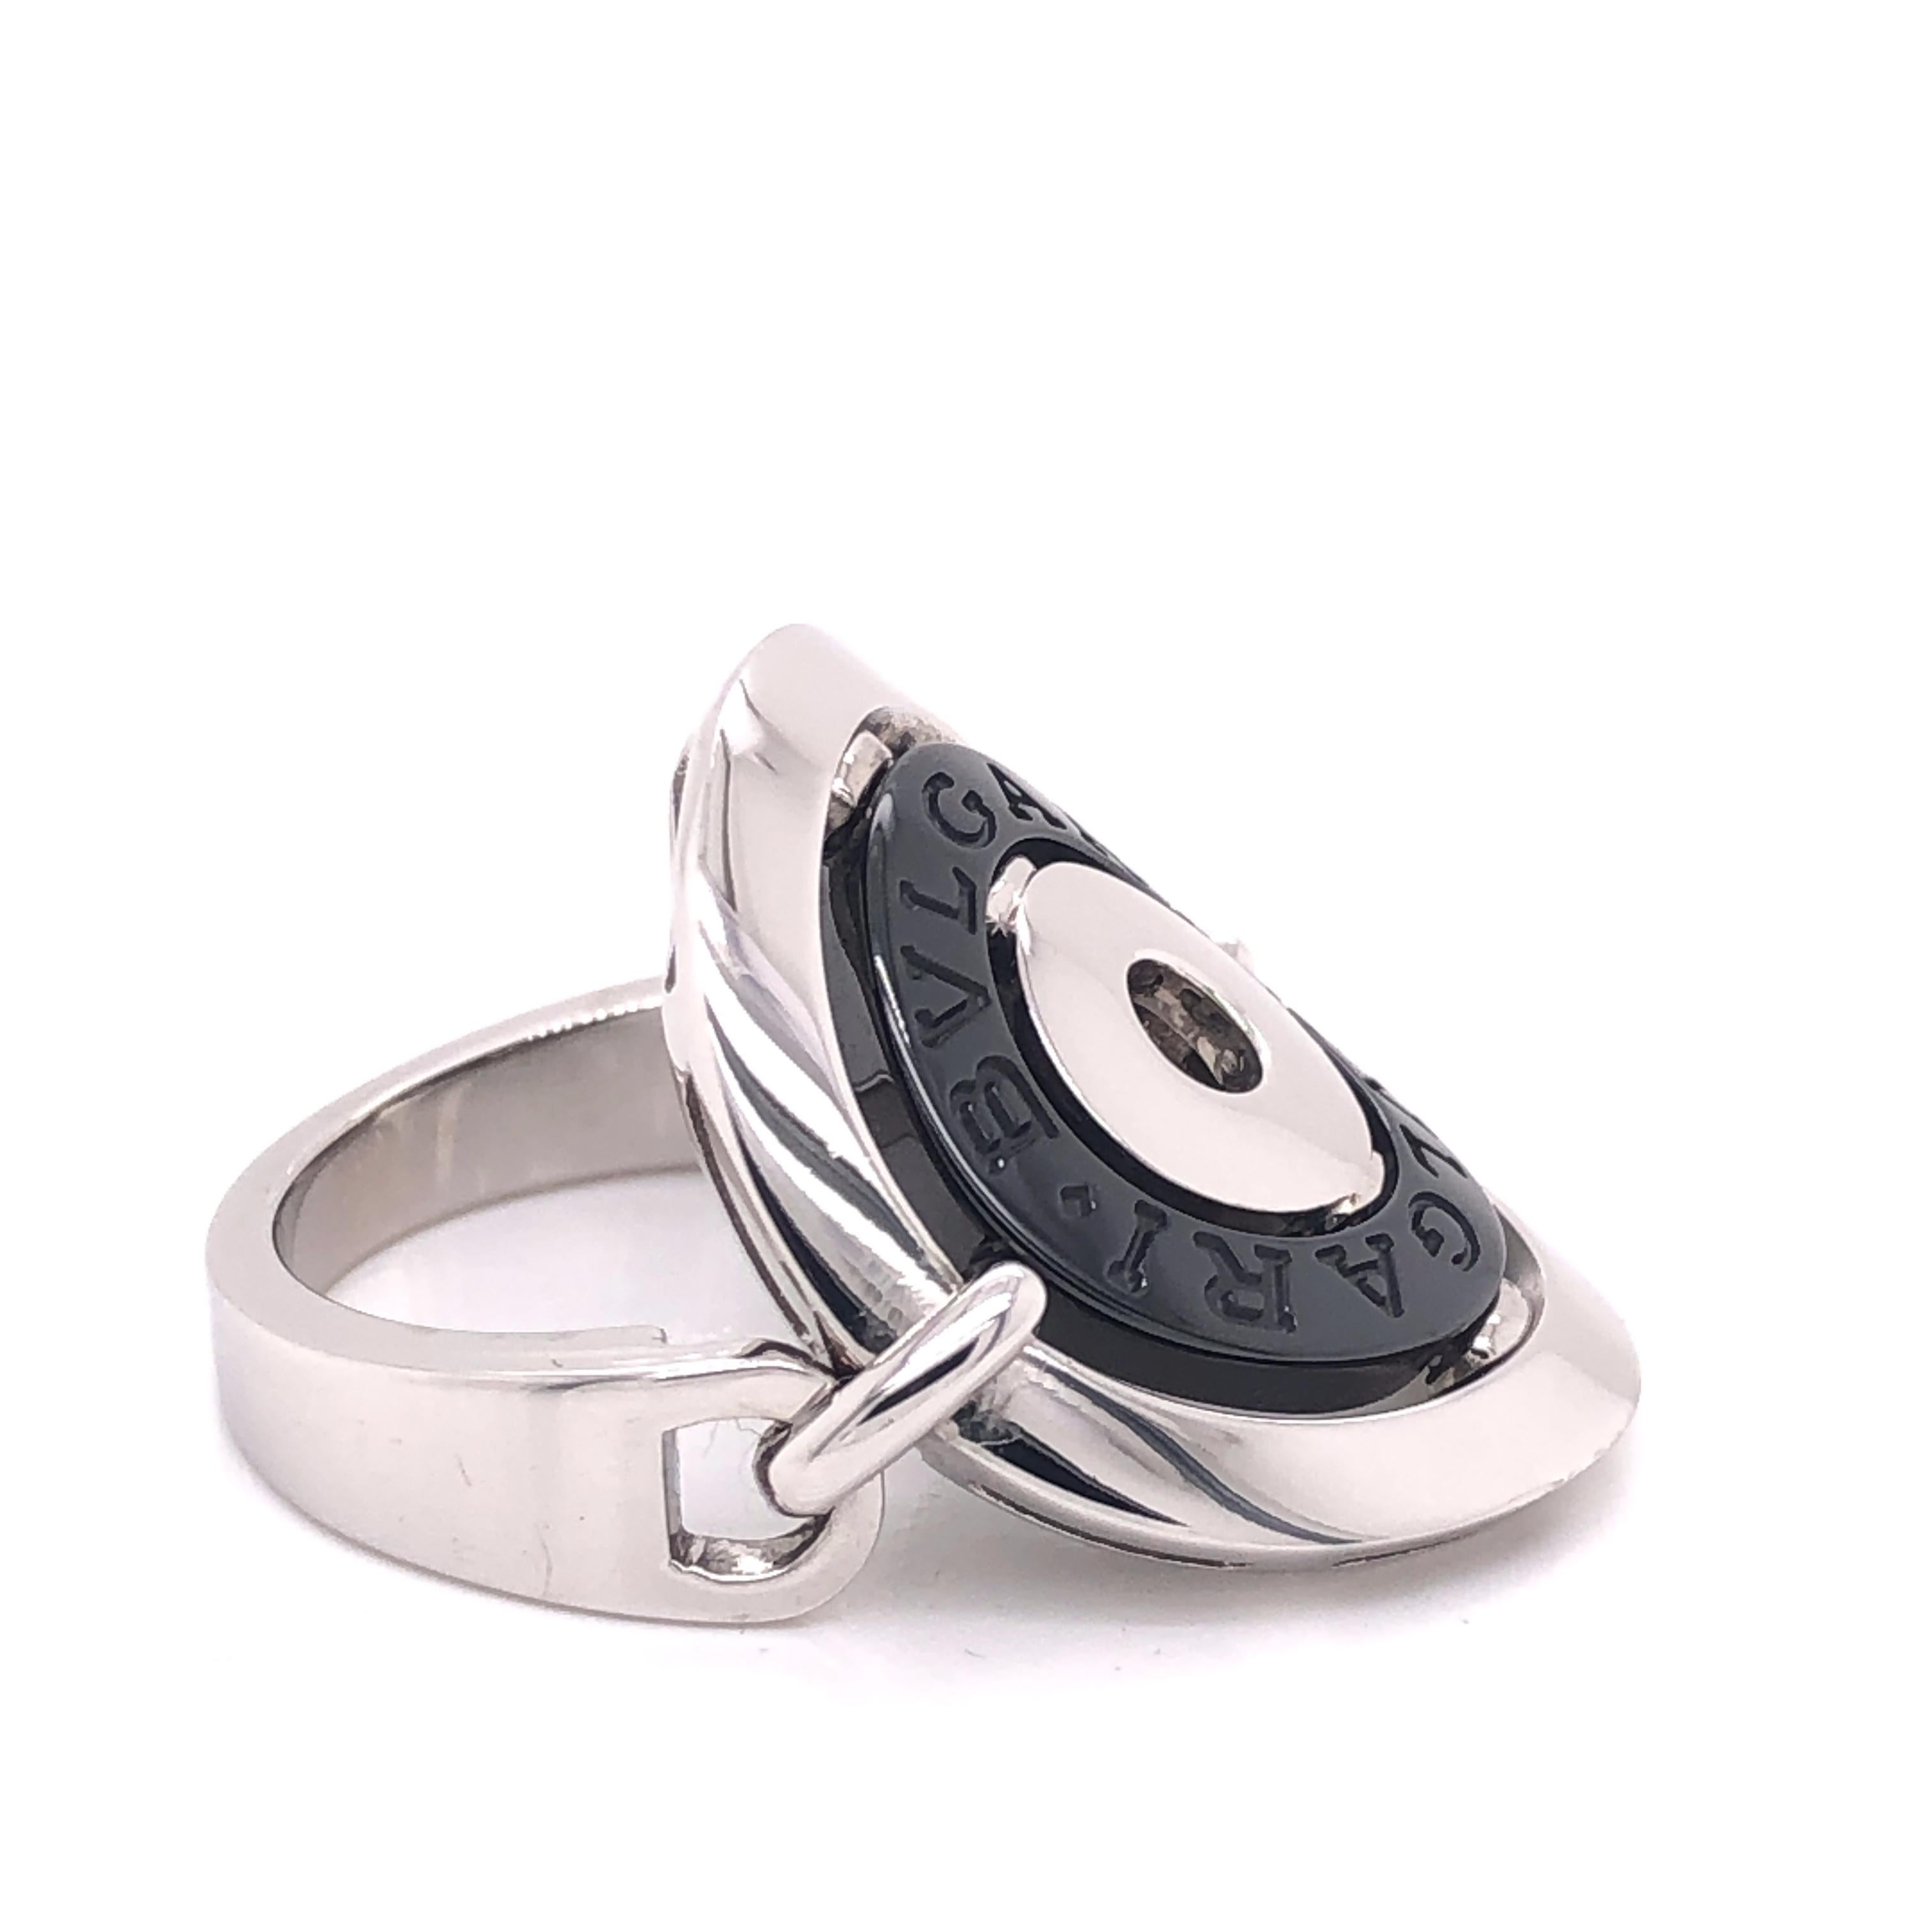 This is a beautiful ring by BVLGARI from the Astrale Cerchi collection, the design is crafted from 18k white gold and is accented with a fine polished finish featuring three circles, the center circle is in black stainless steel hallmarked with the